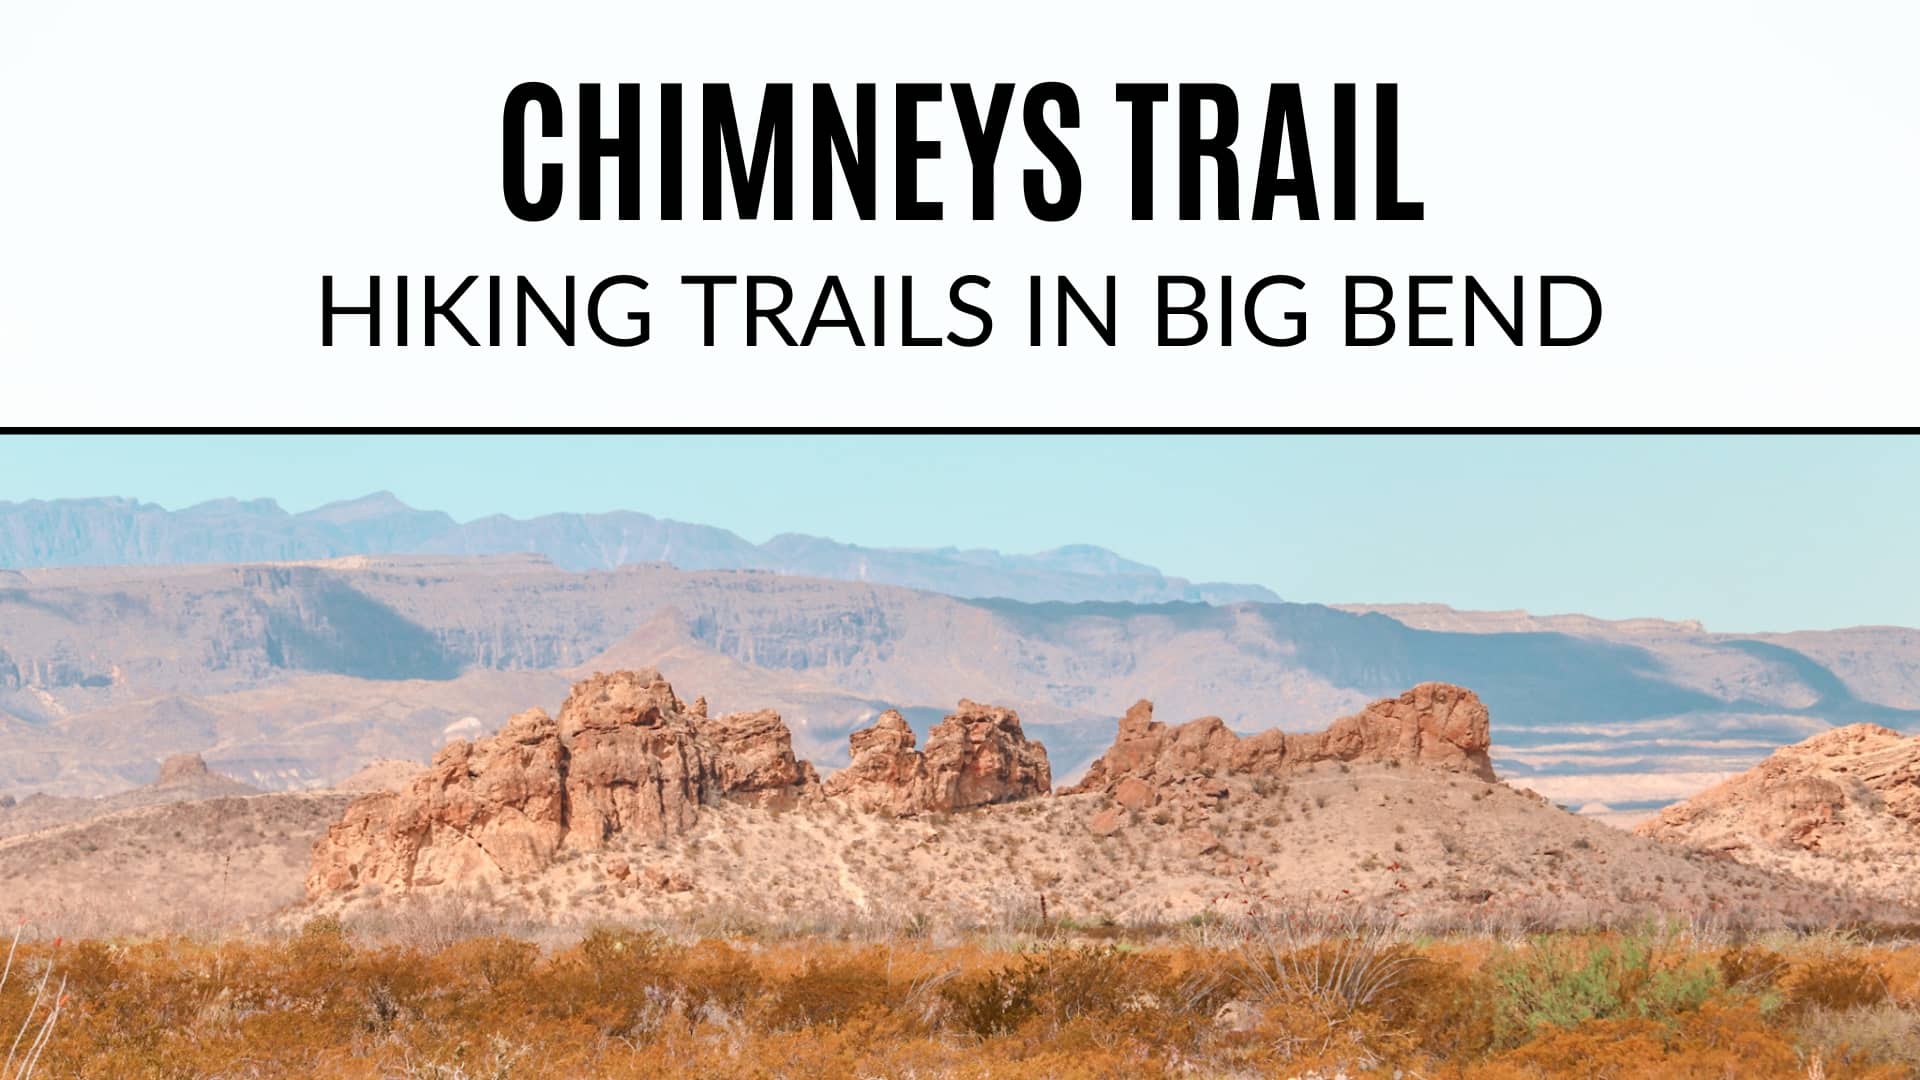 Chimneys Trail Big Bend Featured Image